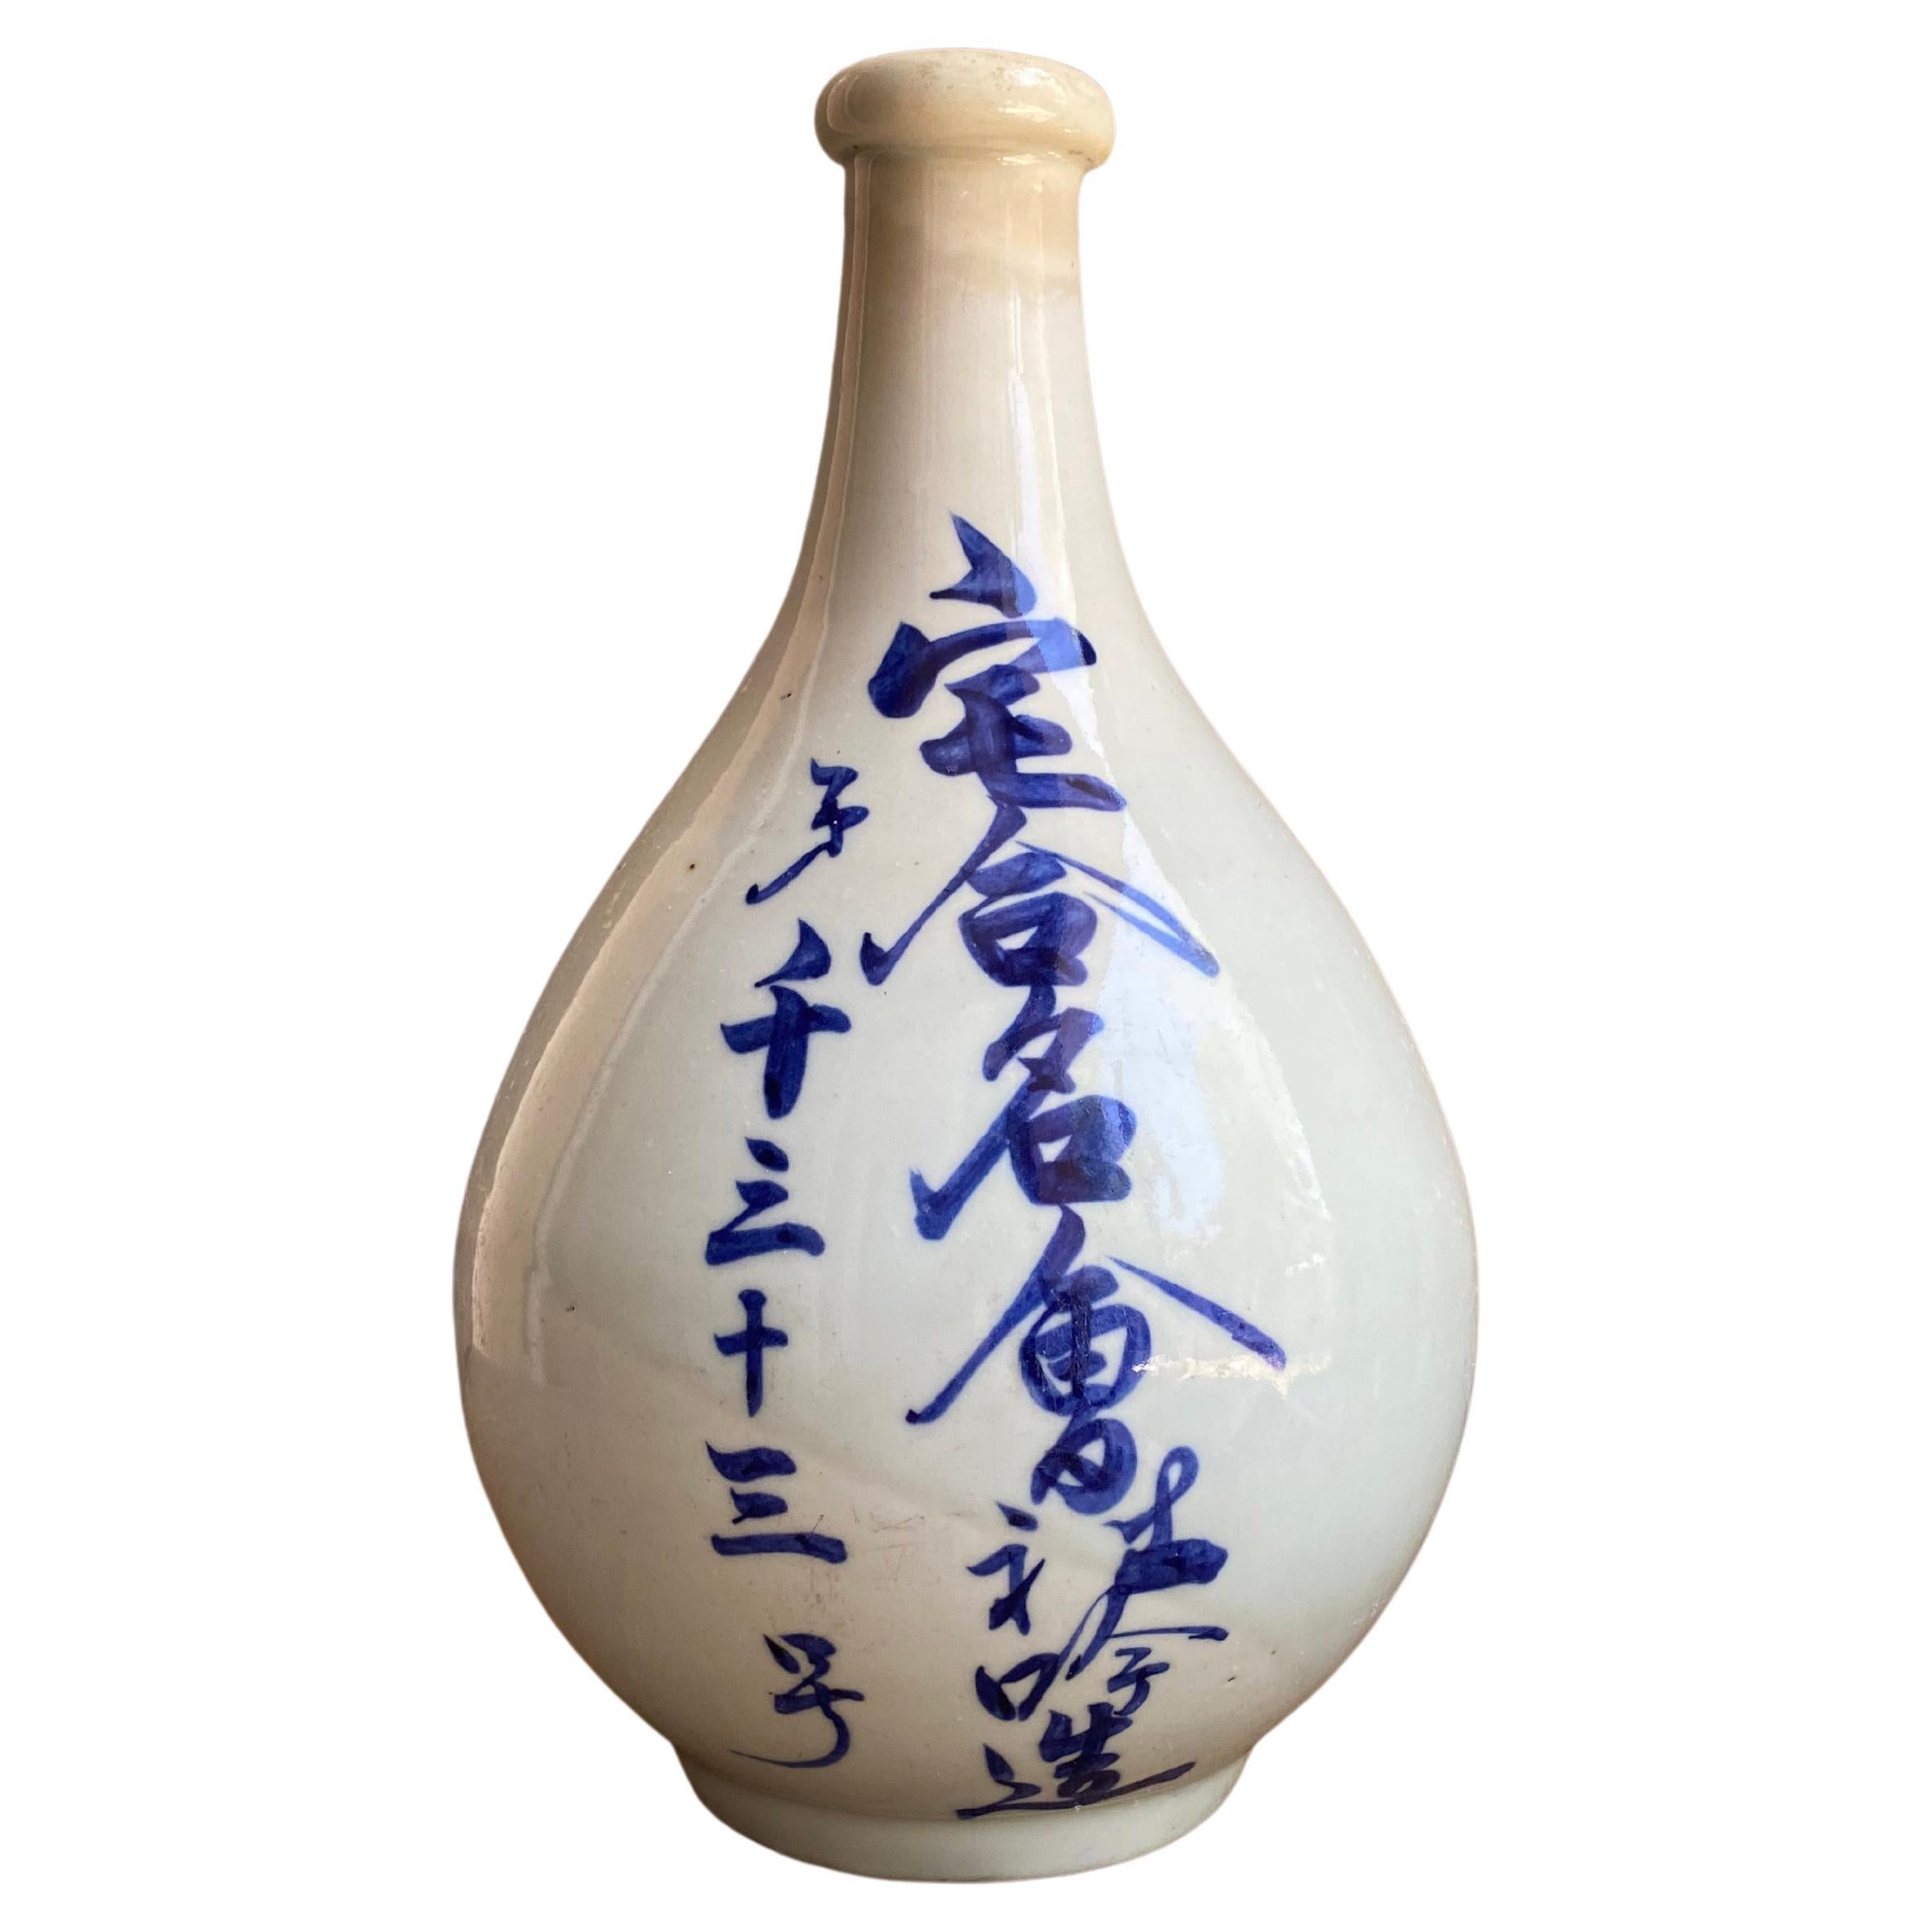 Japanese Ceramic Sake Bottle with Hand-Painted Characters, Early 20th Century For Sale